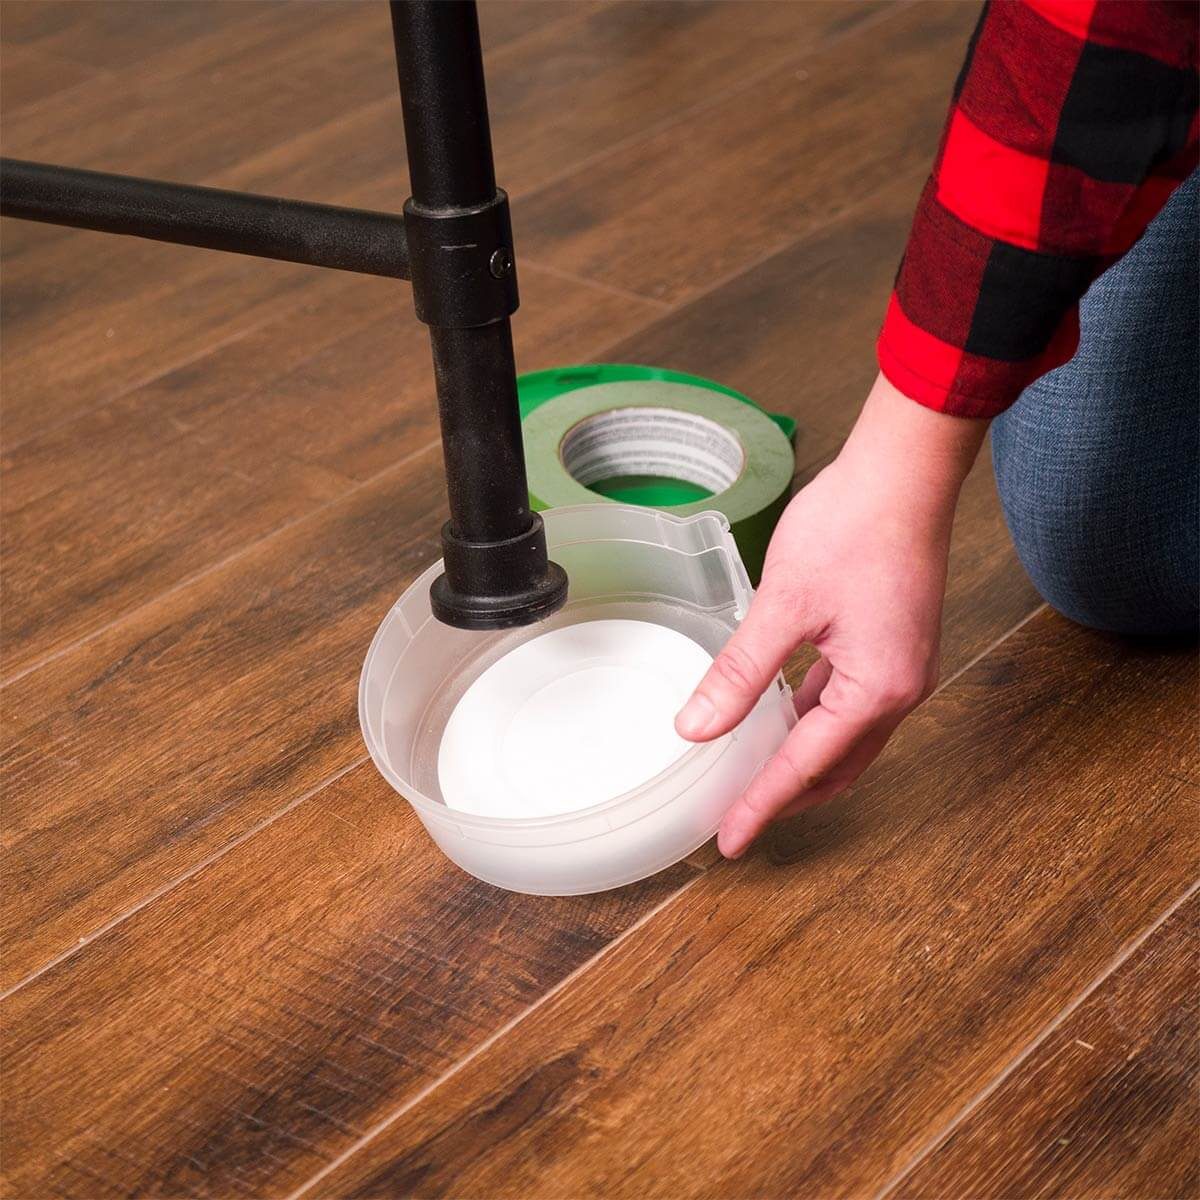 13 Handy Hints for Your Next Painting Project